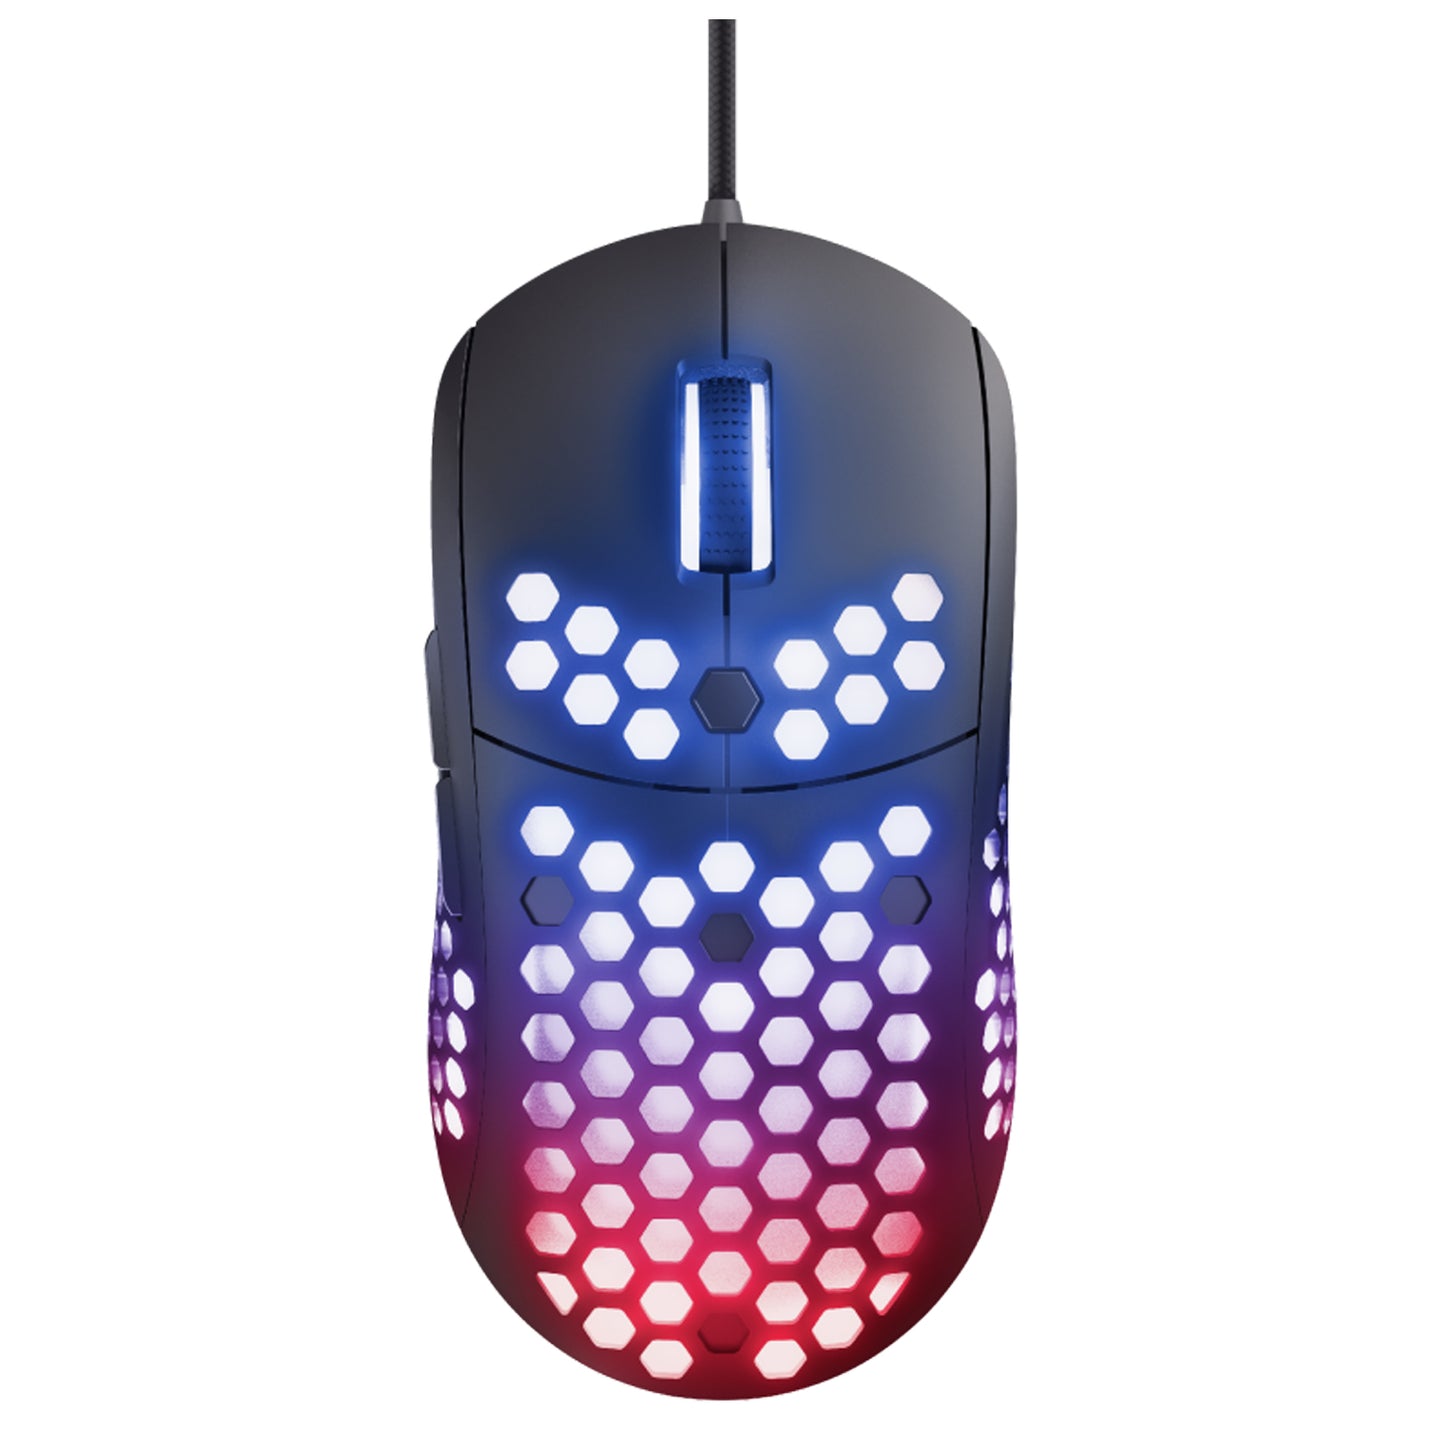 Mouse Gamer Ultraligero Trust Gxt 960 Graphin - Crazygames